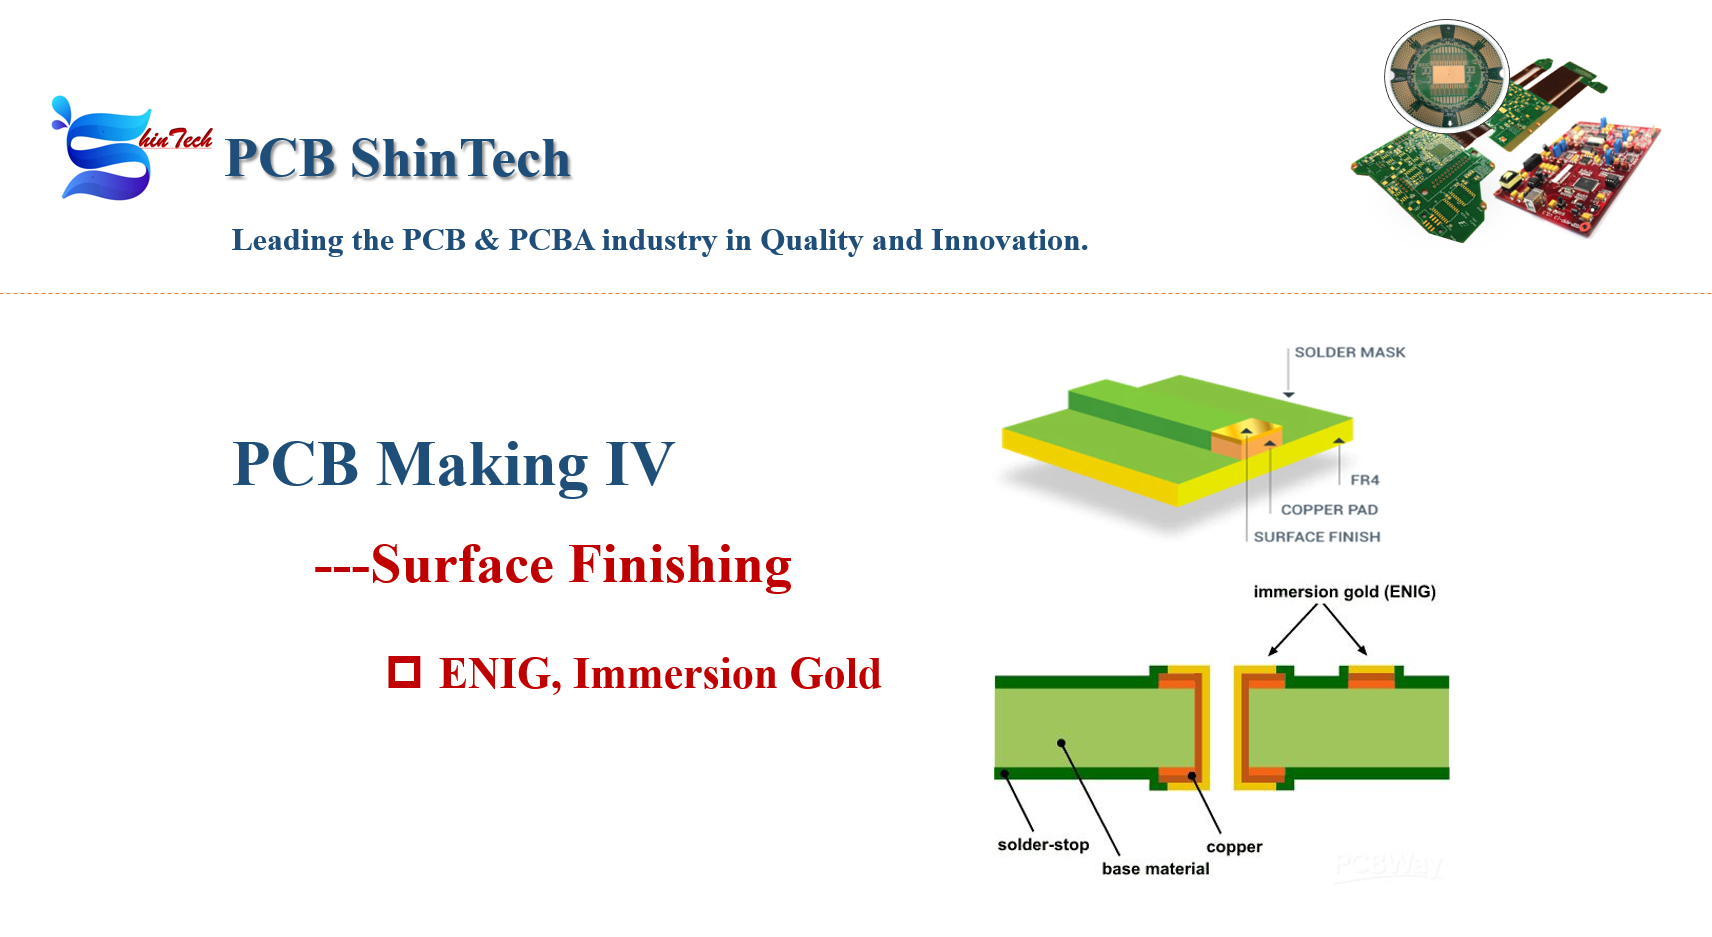 HDI PCB fè —Immersion Gold sifas tretman